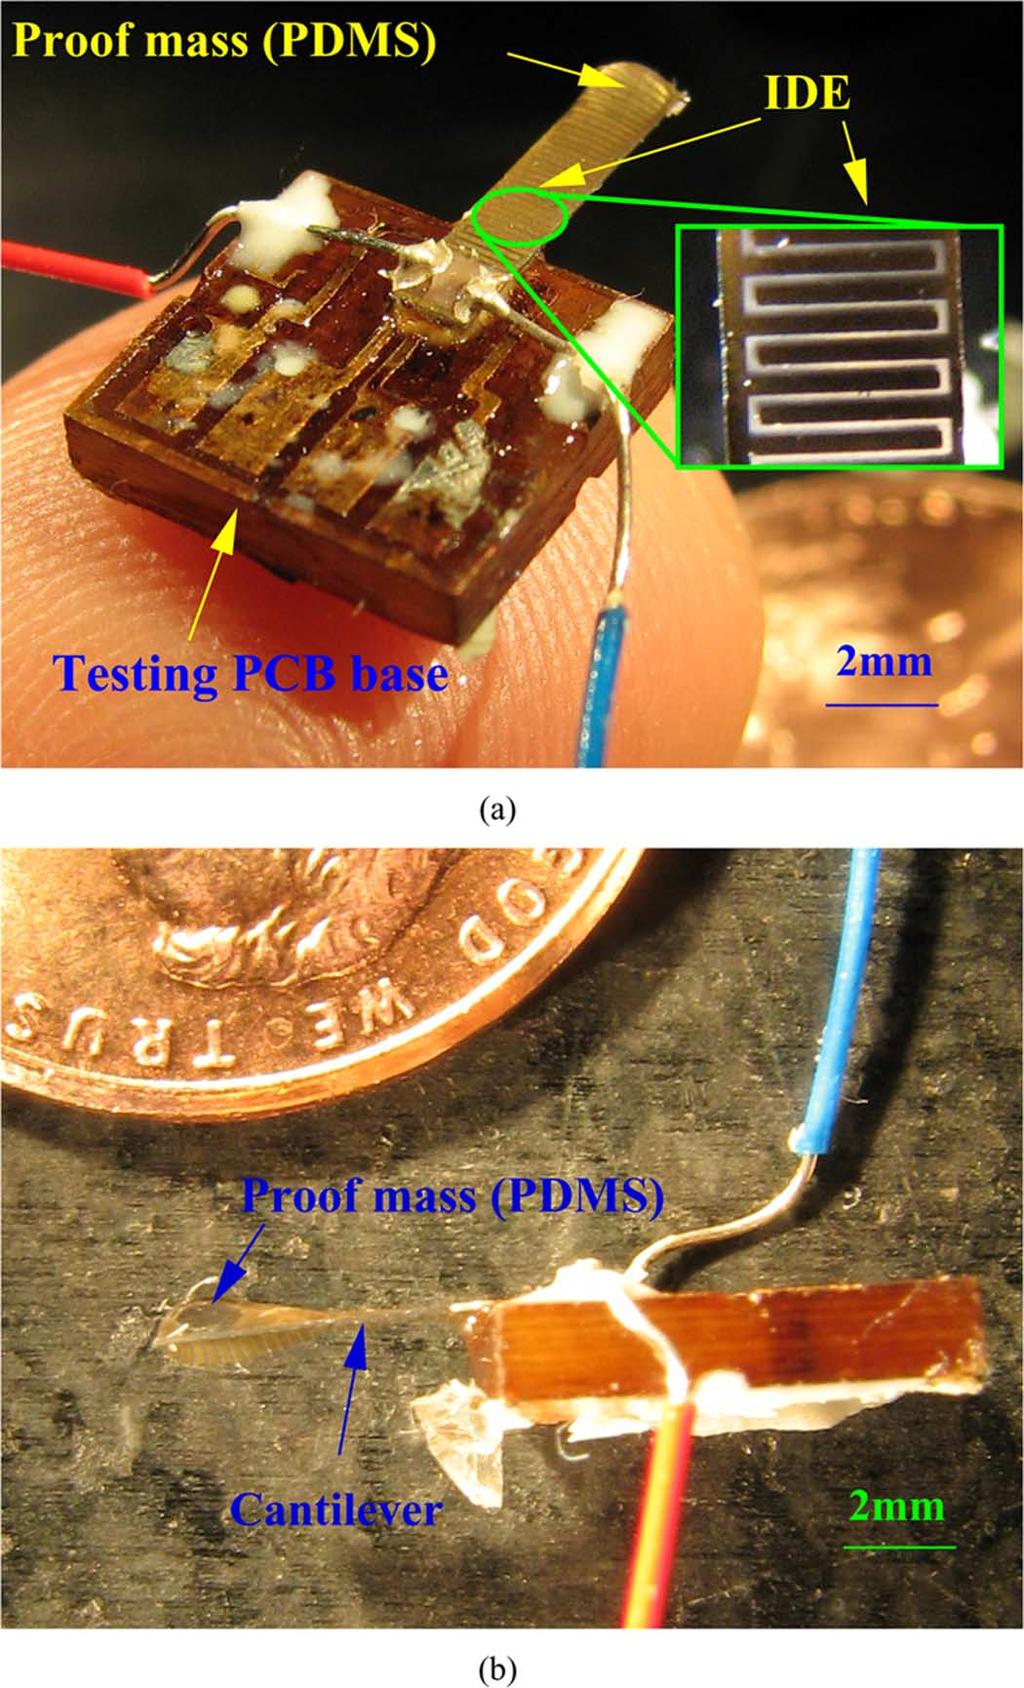 732 IEEE SENSORS JOURNAL, VOL. 9, NO. 7, JULY 2009 attached to a PCB board (8 mm 8mm 1 mm), as shown in Fig. 1. To coat a PDMS layer, we dip the PMN-PT cantilever into PDMS.